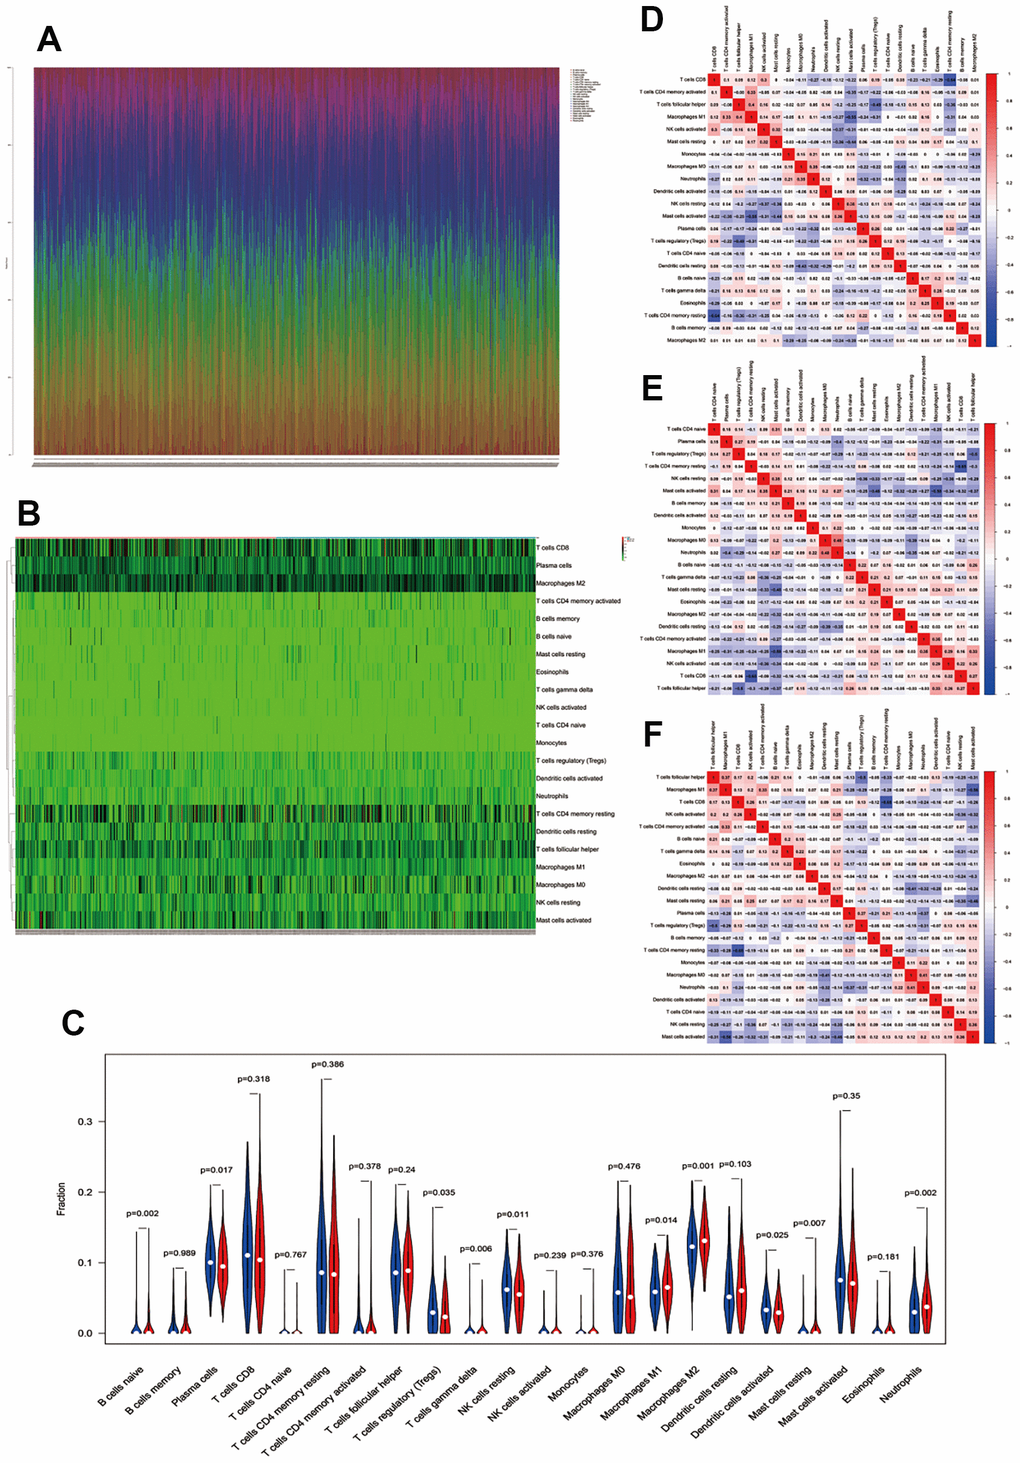 Immune infiltration between the low- and high-risk groups. (A) Fractions of immune cells in every single CC sample. (B, C) Heatmap and vioplot of immune cells between the low- and high-risk groups. Correlation between immune cells in low-risk samples (D), high-risk samples (E), and all colon cancer samples (F).